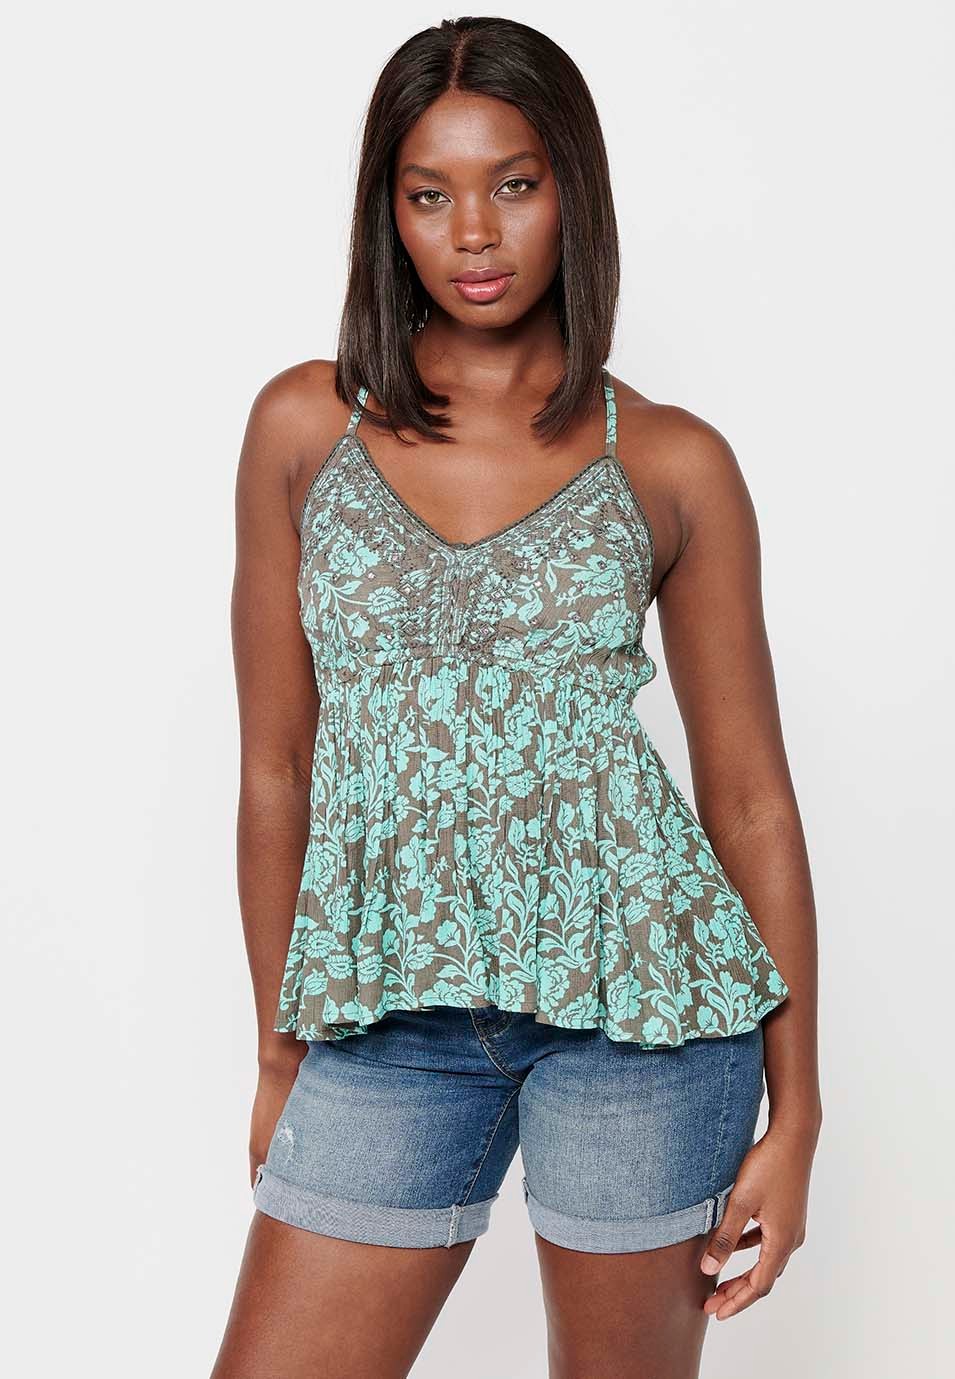 Strap Blouse with Floral Print and Turquoise Front Detail for Women